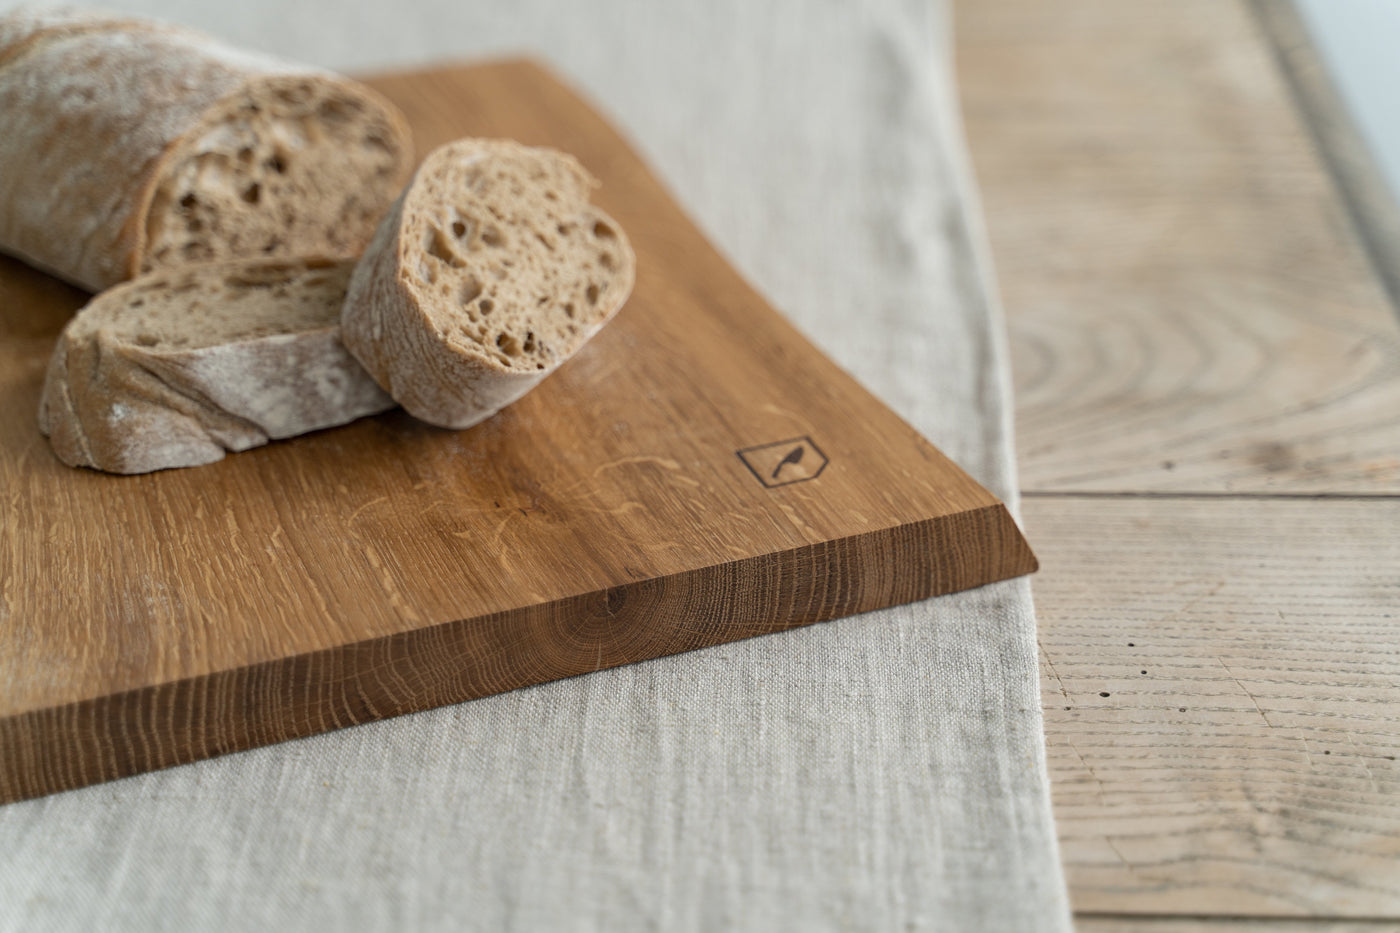 Mediea Medium Oak Cutting Board-Cooking and Eating-COOKING/SERVING TOOLS, TABLEWARE, TRAYS / BOARDS-Forest Homes-Nature inspired decor-Nature decor